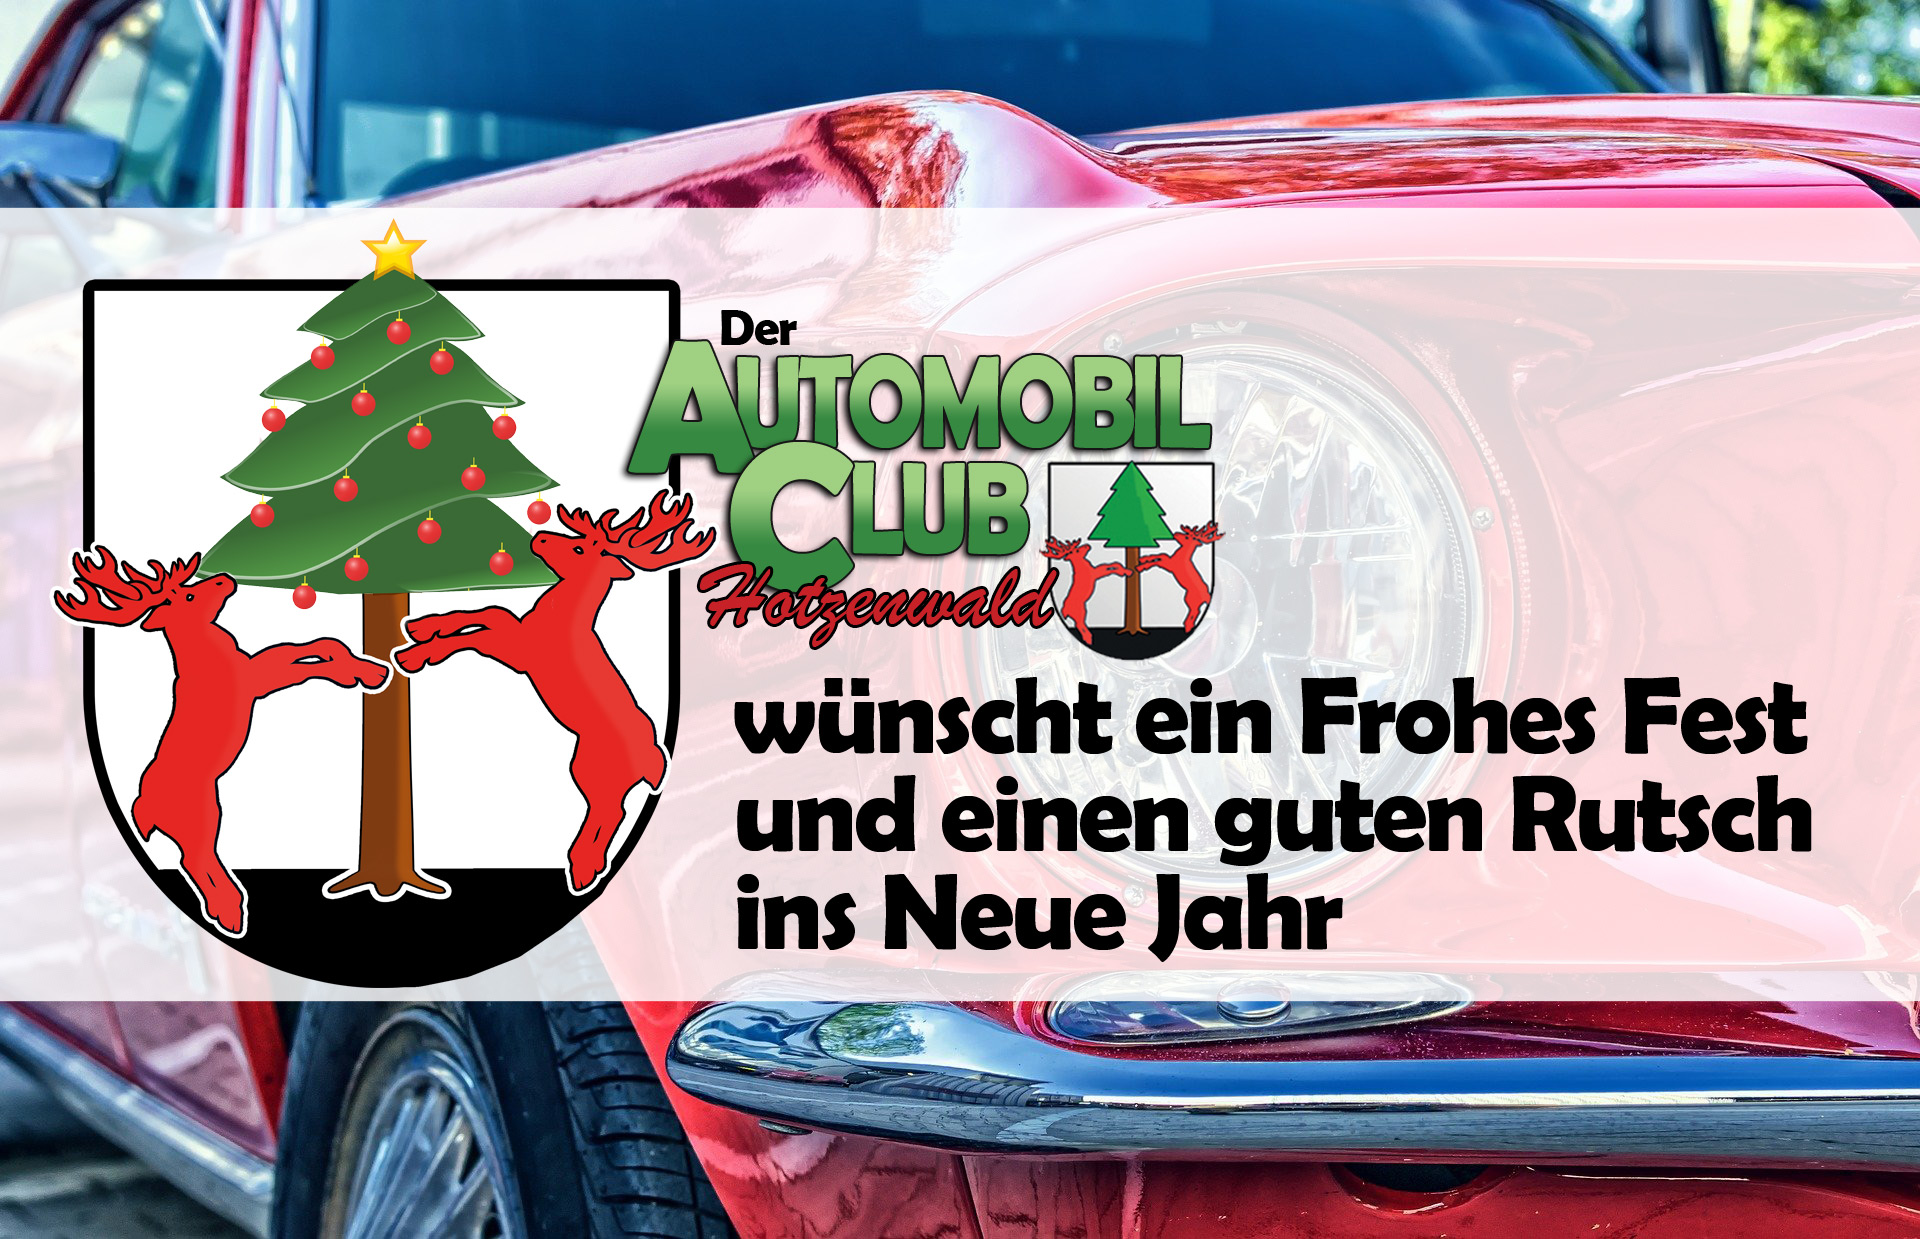 Frohes Fest 2020